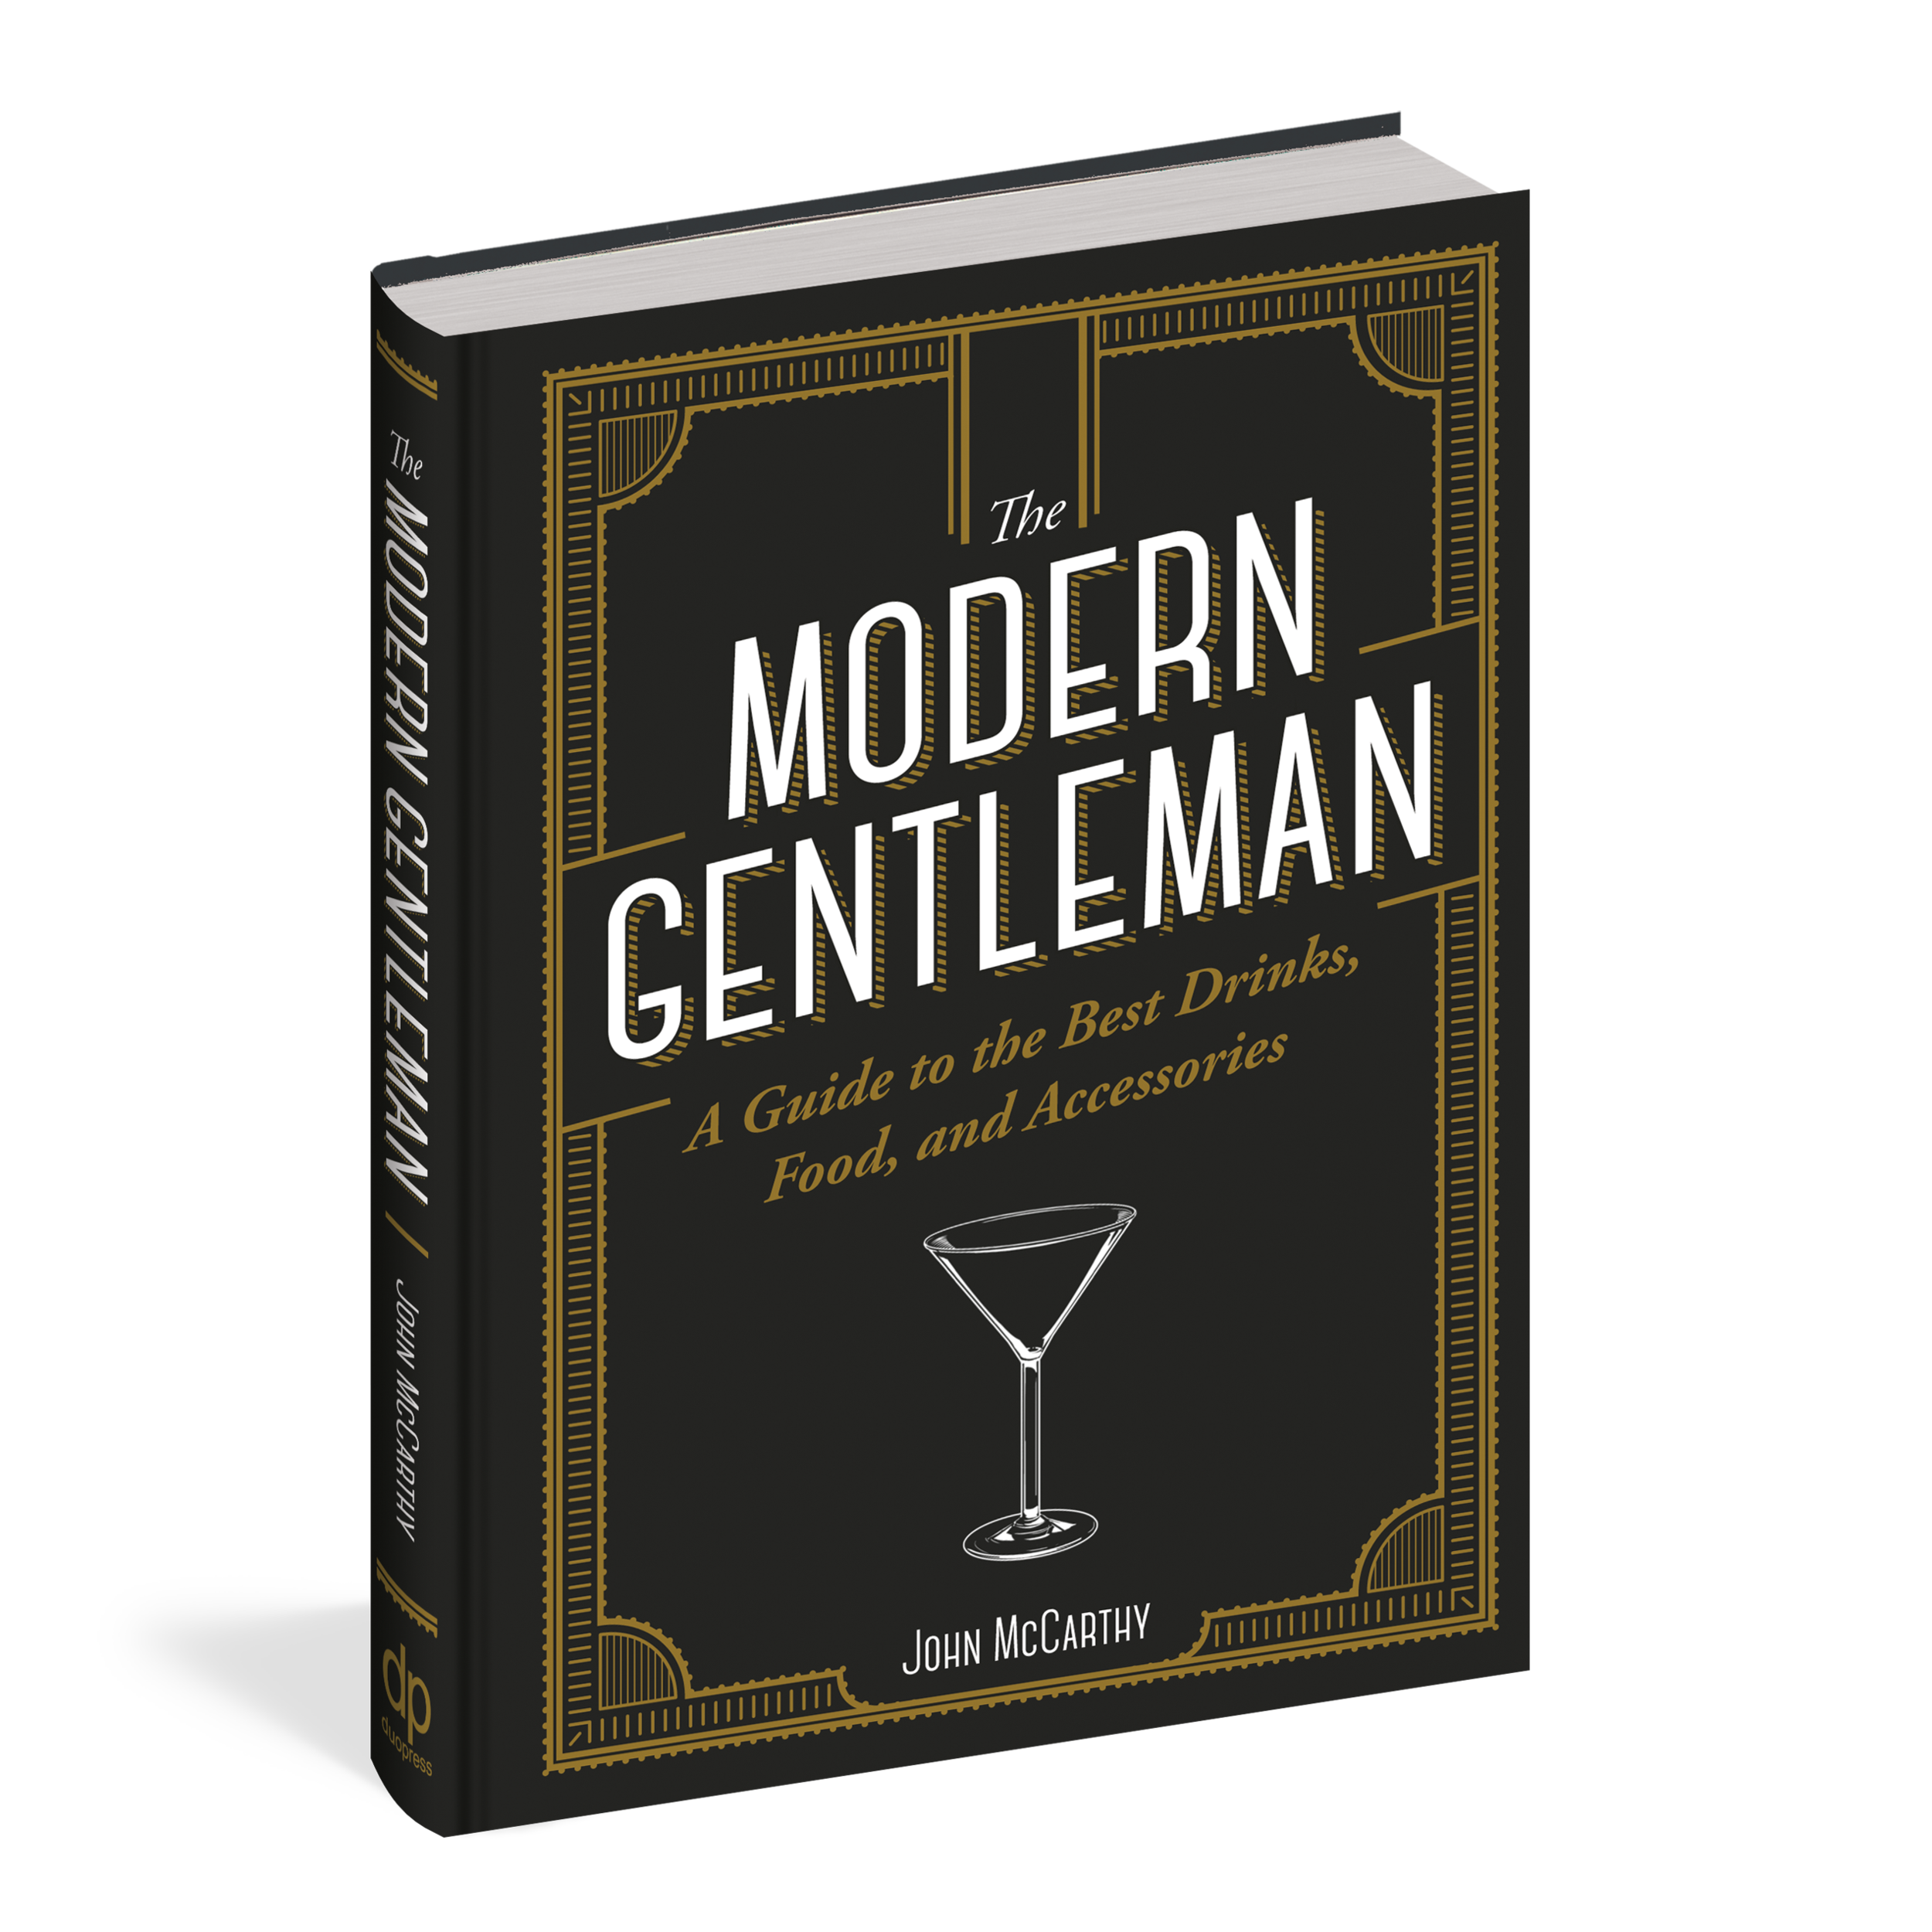 The Modern Gentleman: The Guide to the Best Food, Drinks, and Accessories (Copy) (Copy) (Copy) (Copy)